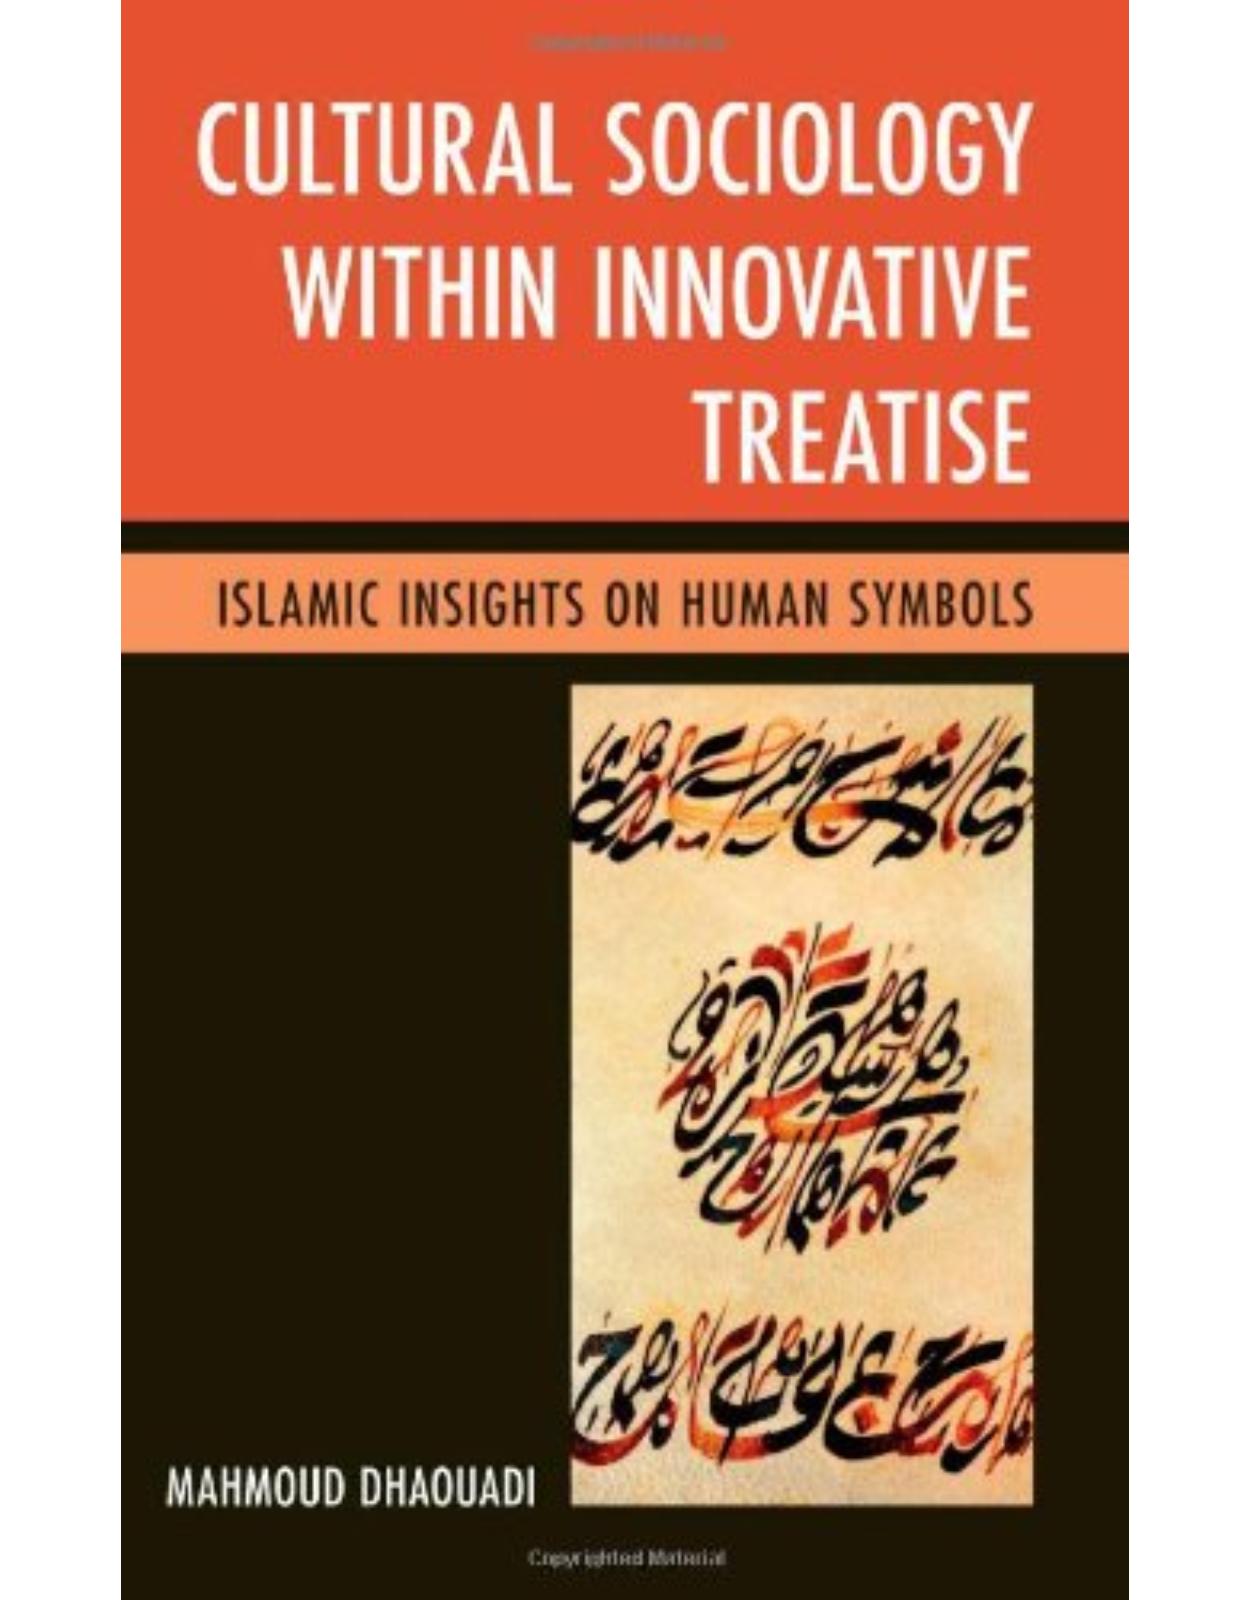 Cultural Sociology within Innovative Treatise: Islamic Insights on Human Symbols